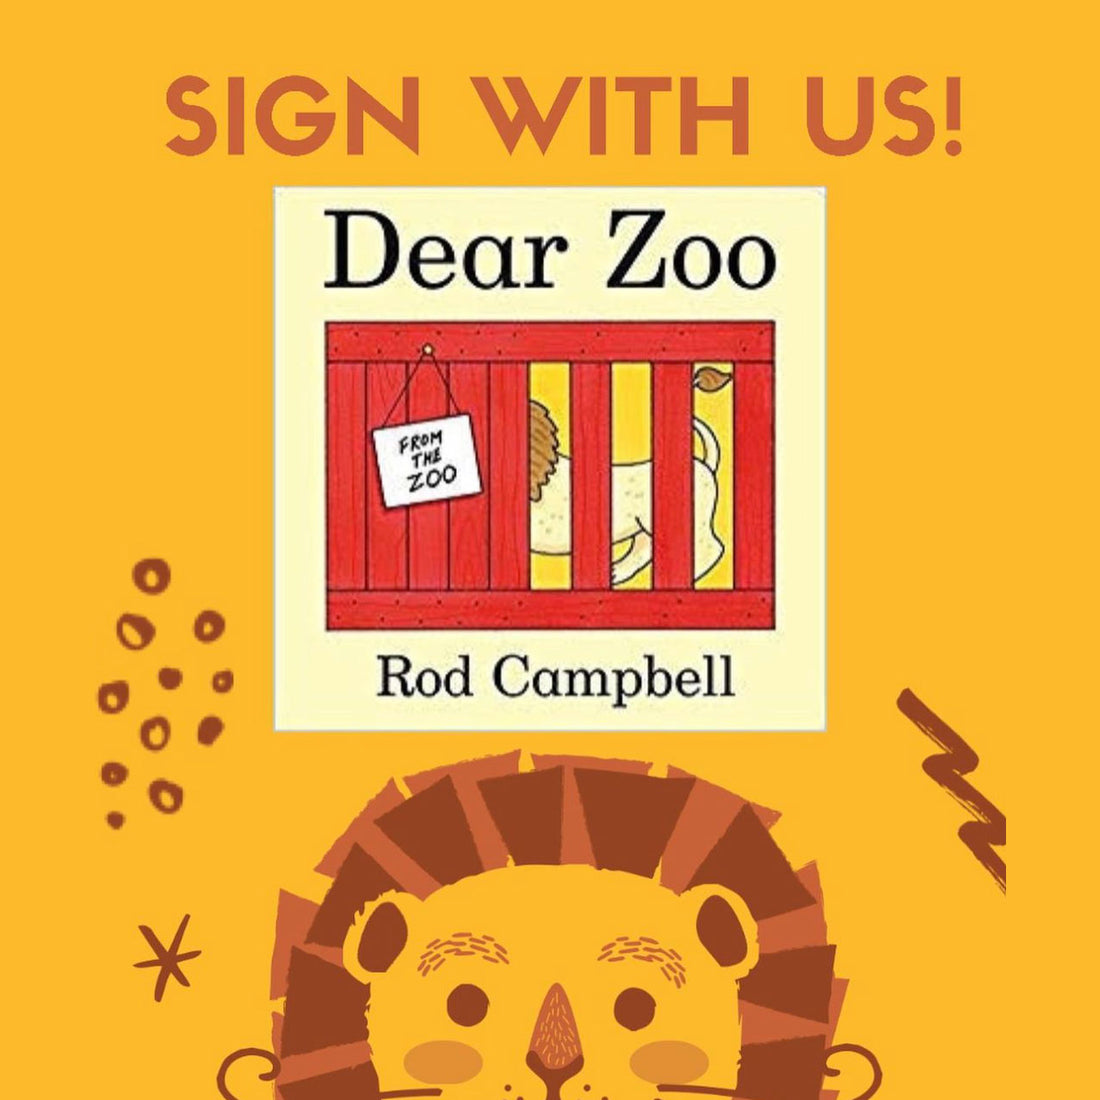 Sign with us: Dear Zoo